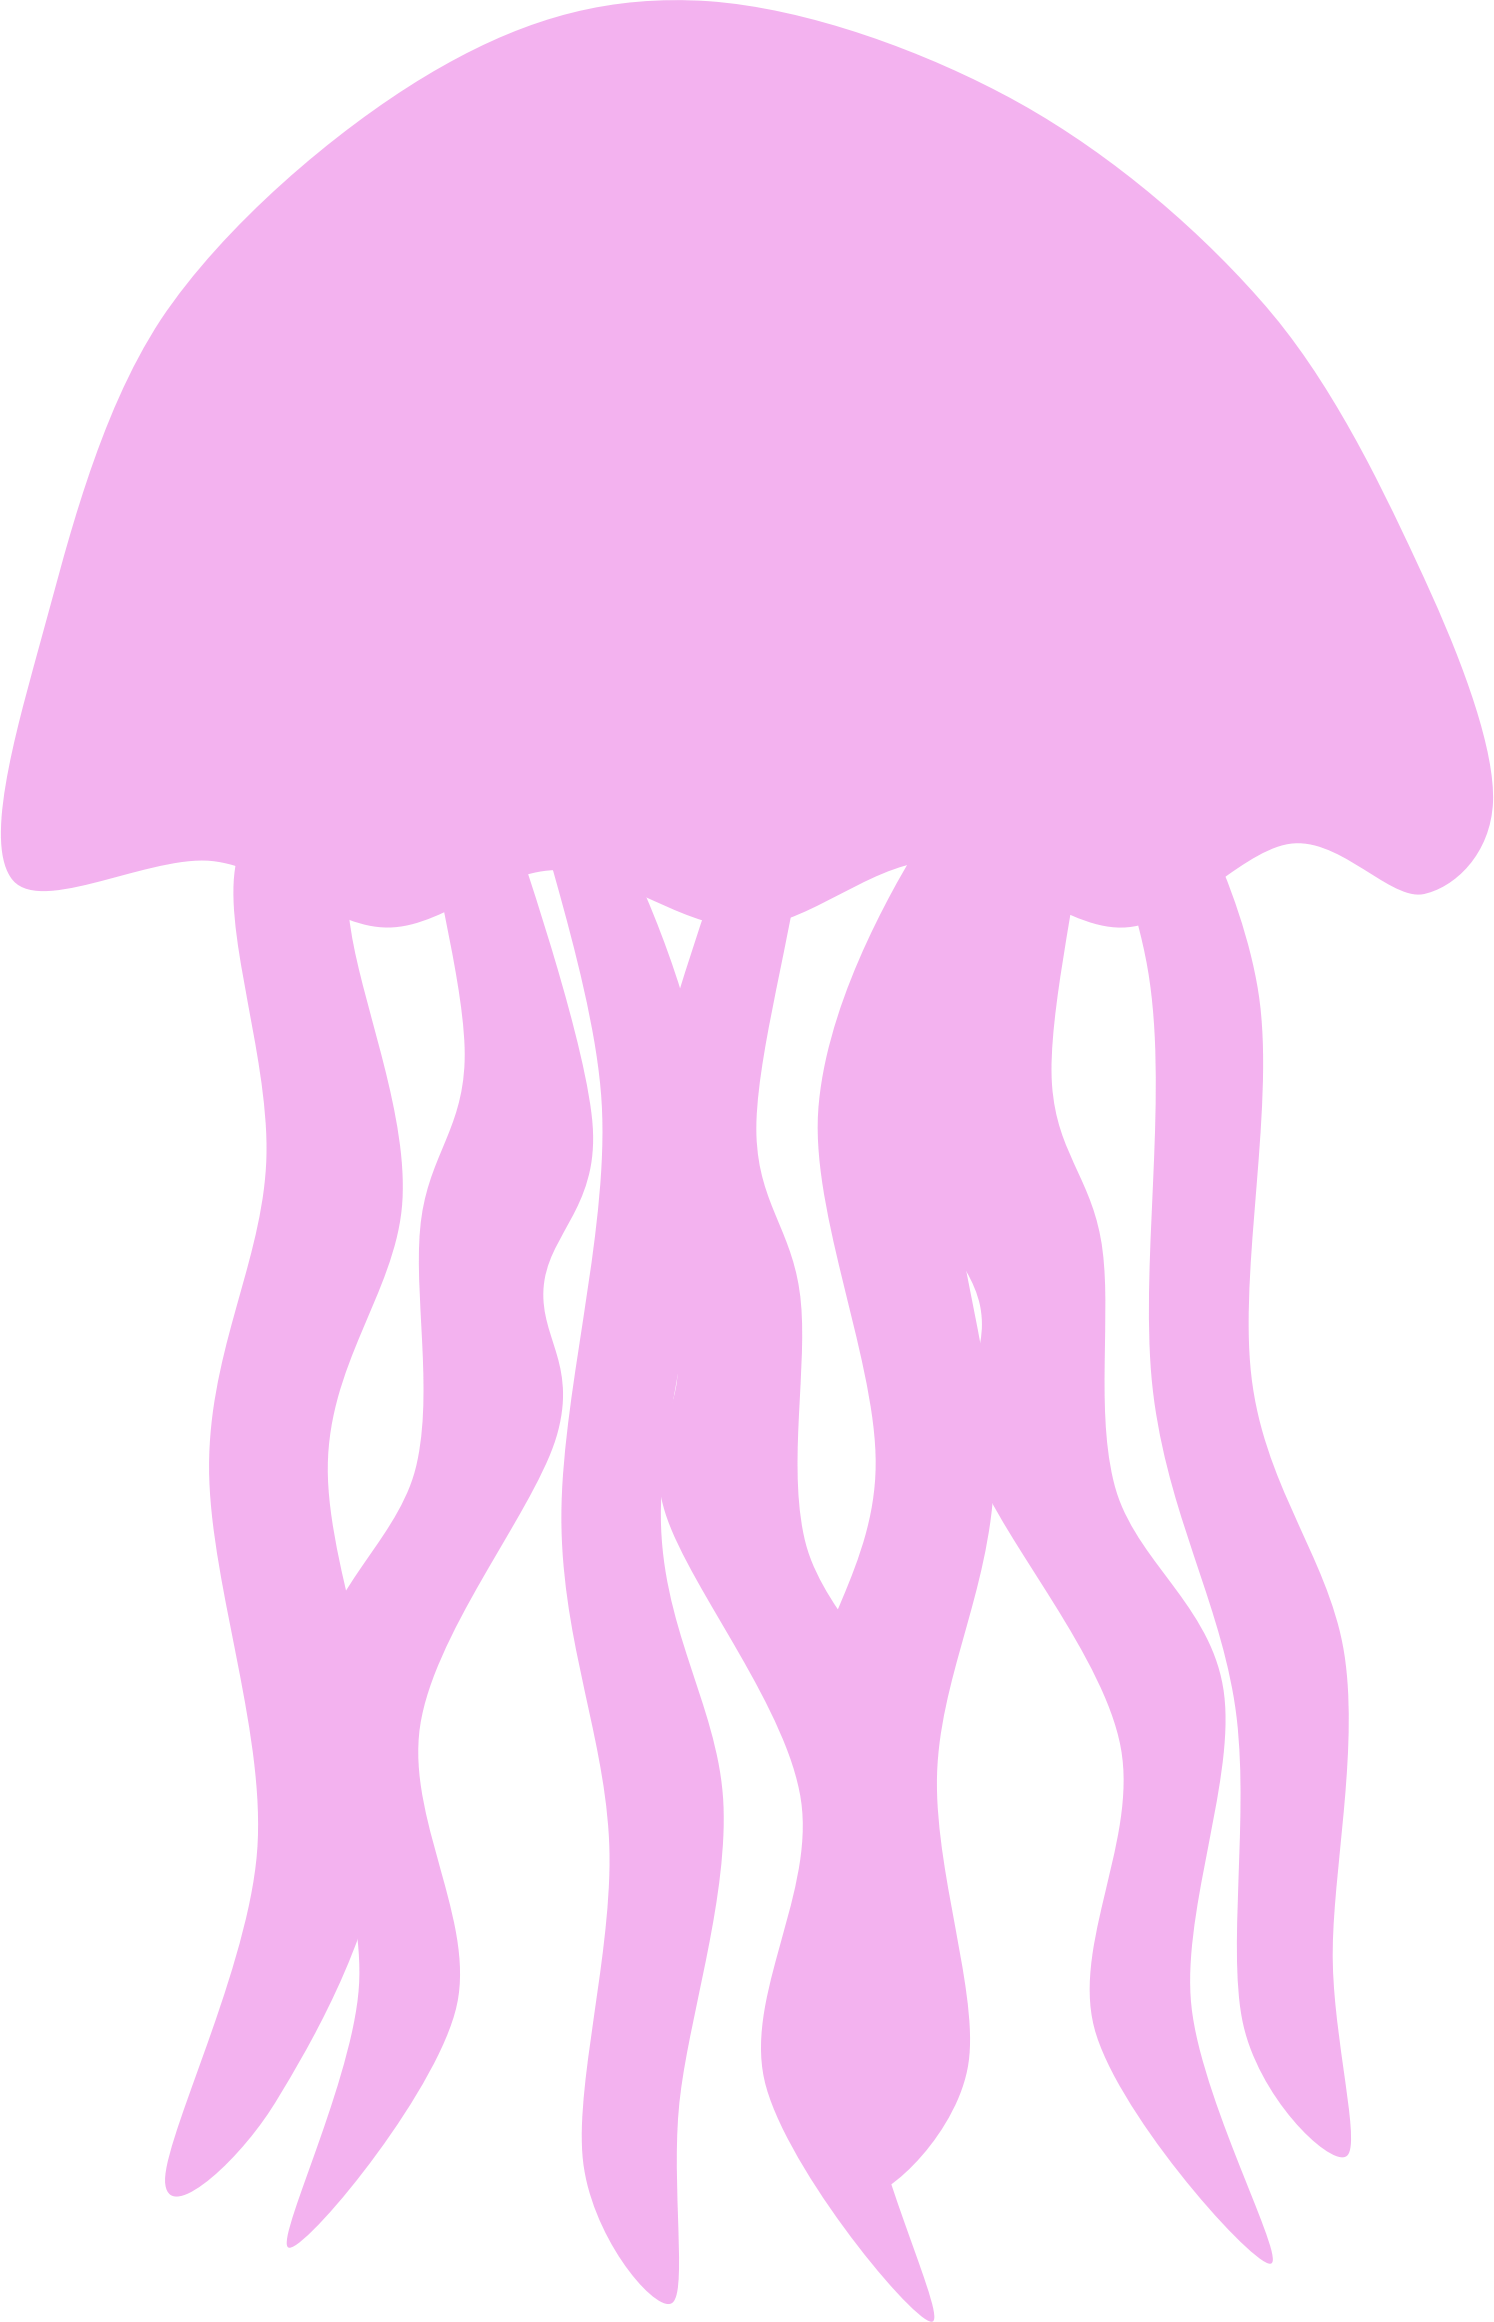 Jellyfish silhouette scout.